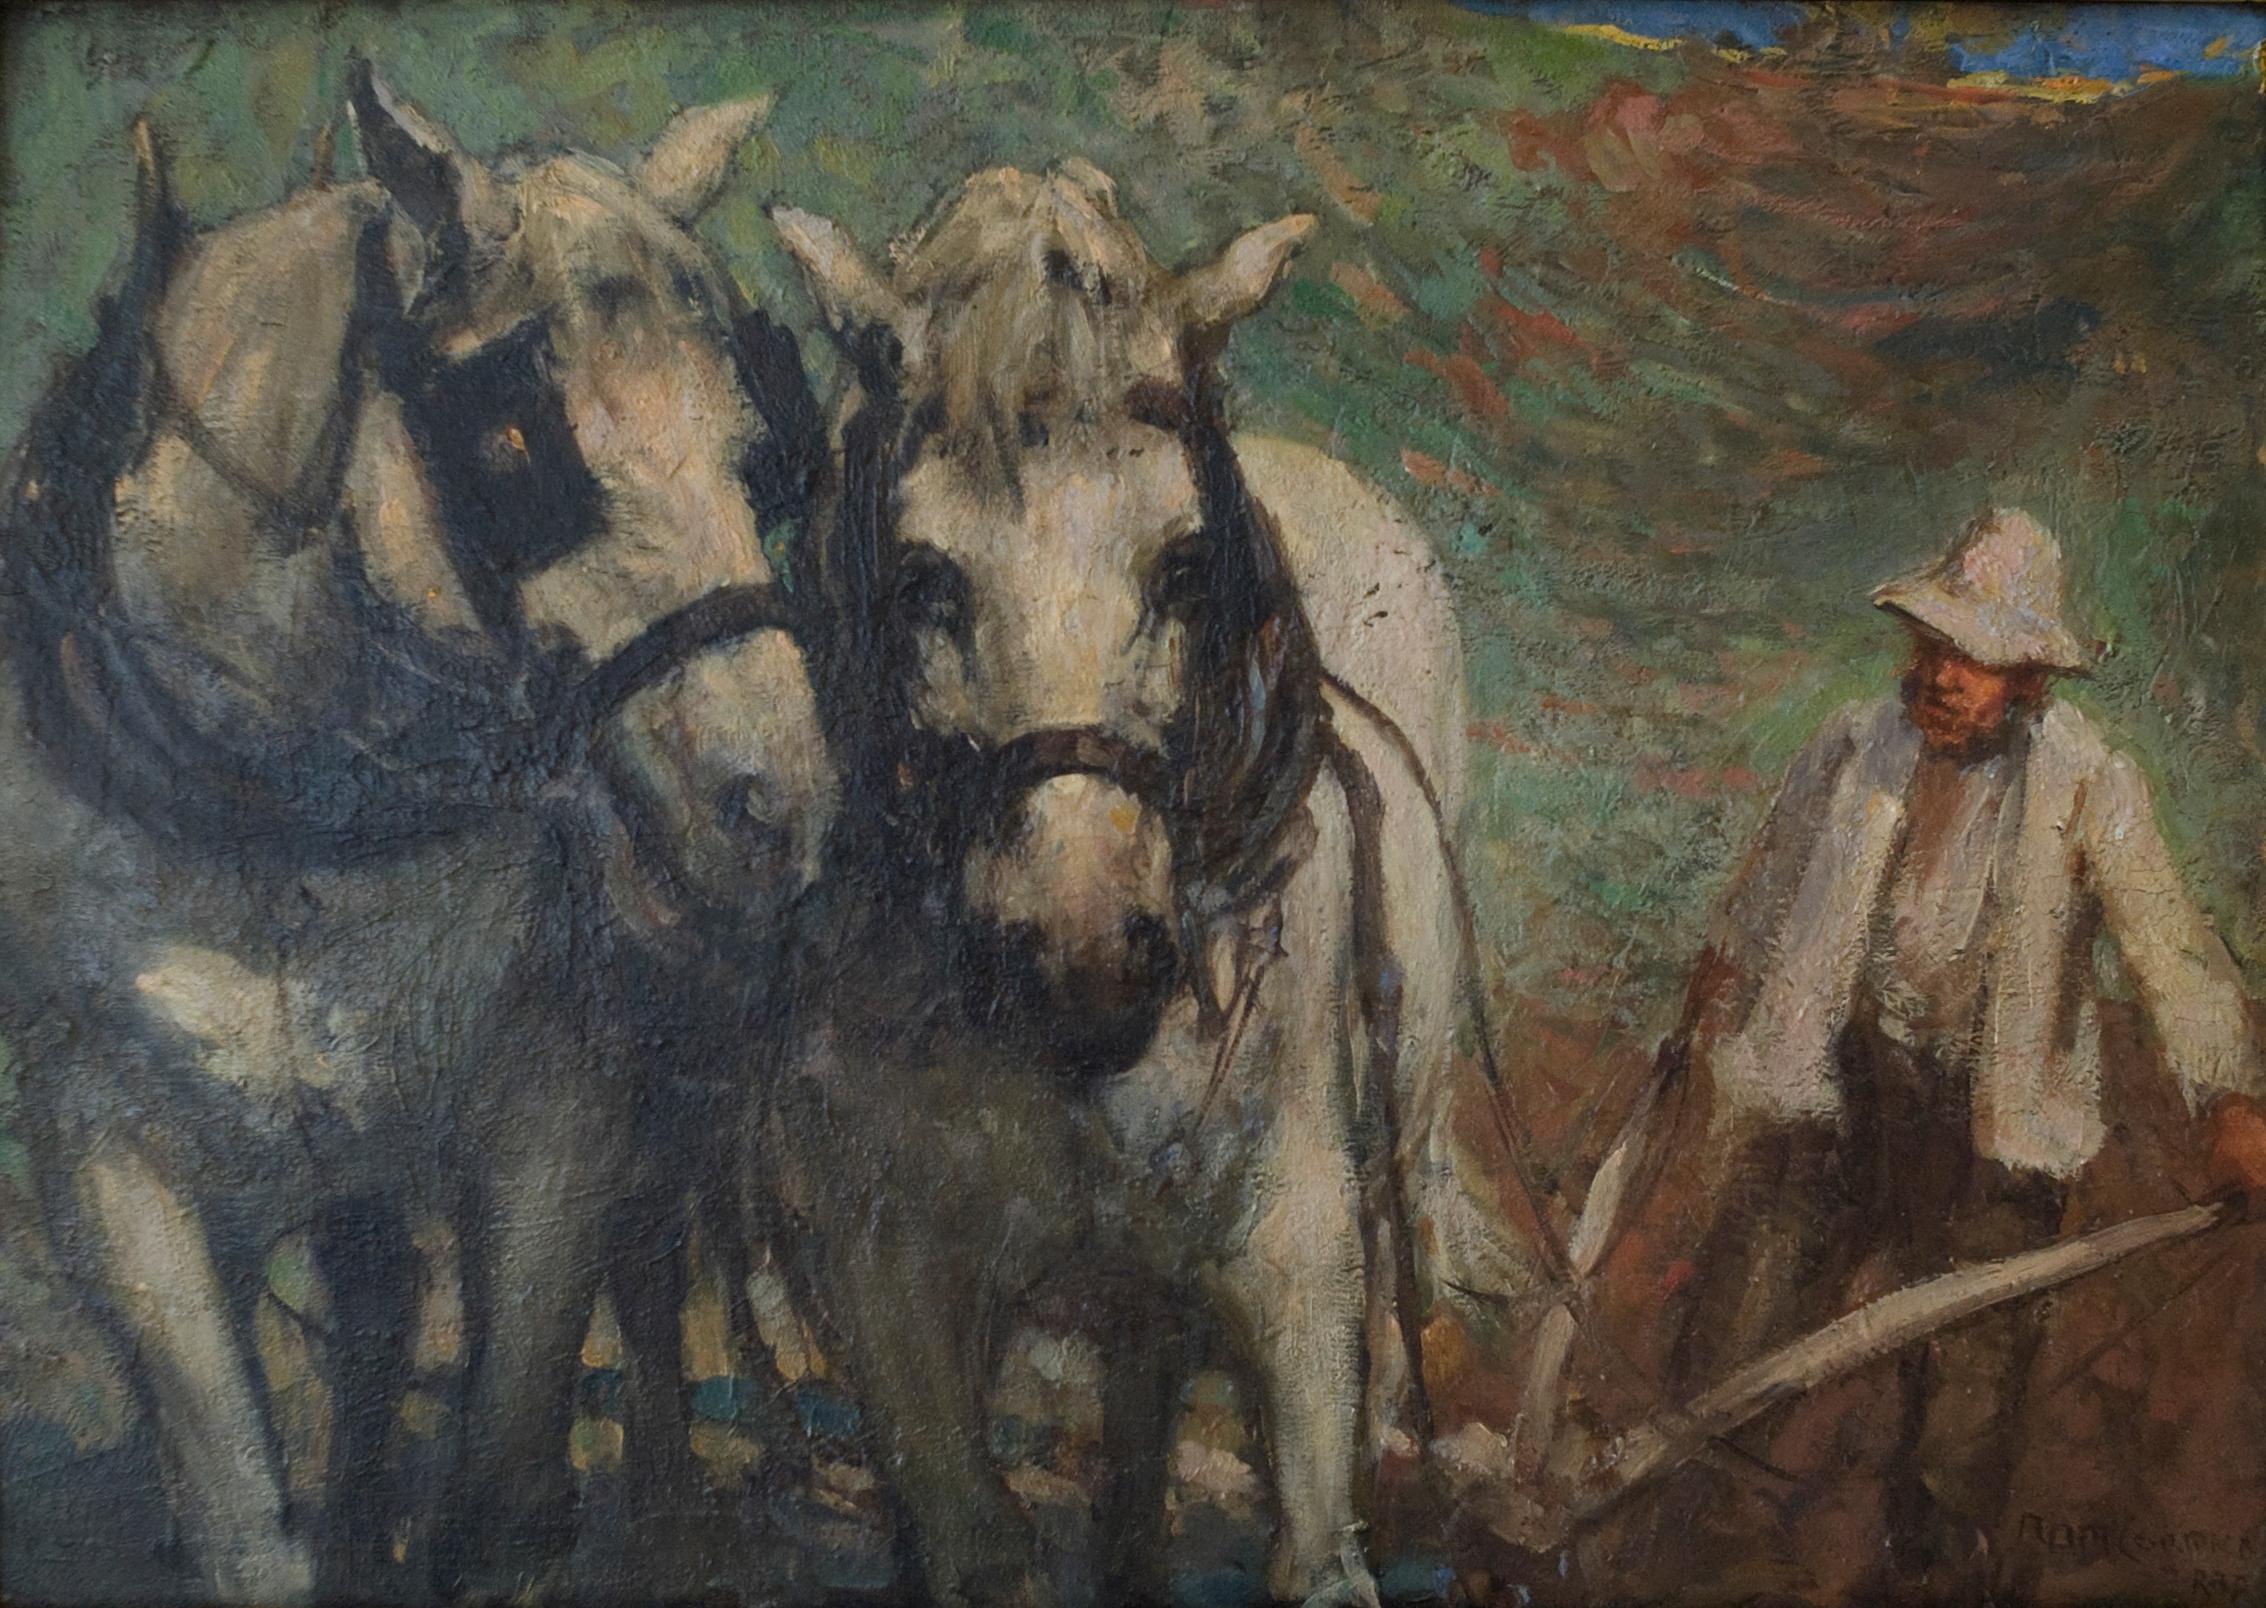 Arthur David McCormick Animal Painting - Impressionist style painting of Draft Horses, titled "The Ploughing Team"